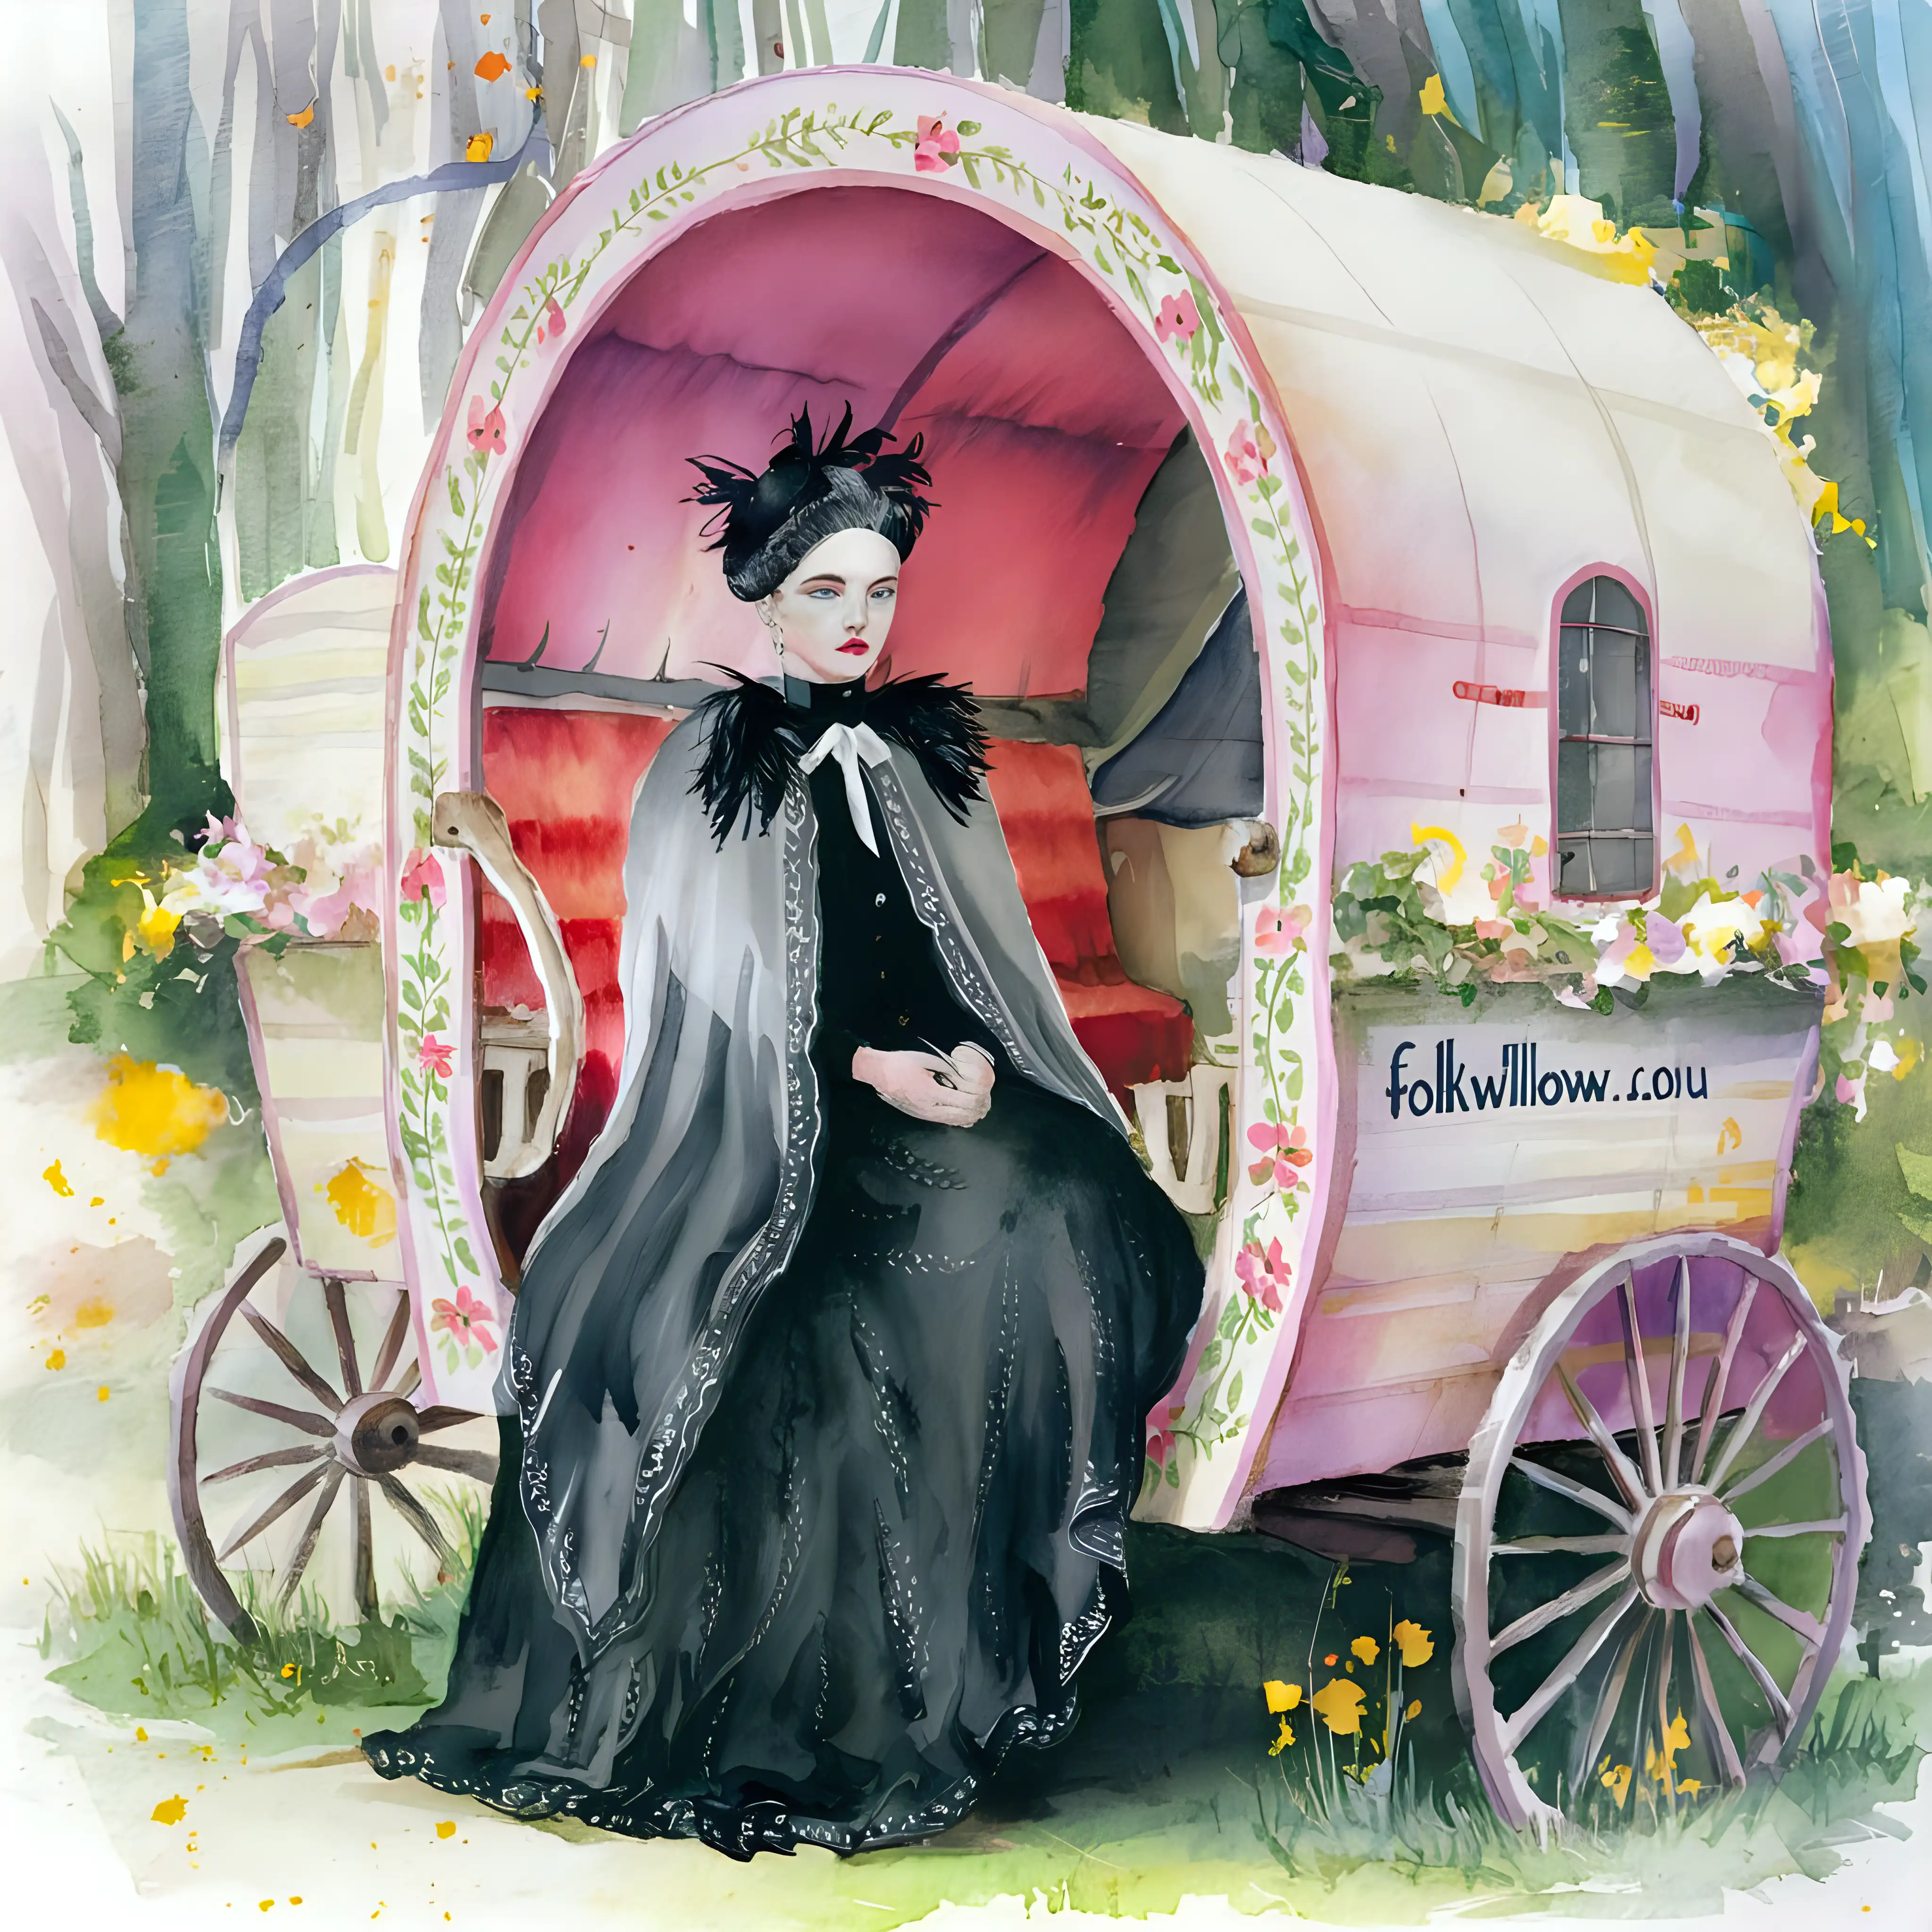 a pastel coloured watercolour painting of victorian era  lady in a mourning dress, black feathers on her cape, she is sitting in a gypsy wagon, the name FolkWillow.com.au is on the wagon side